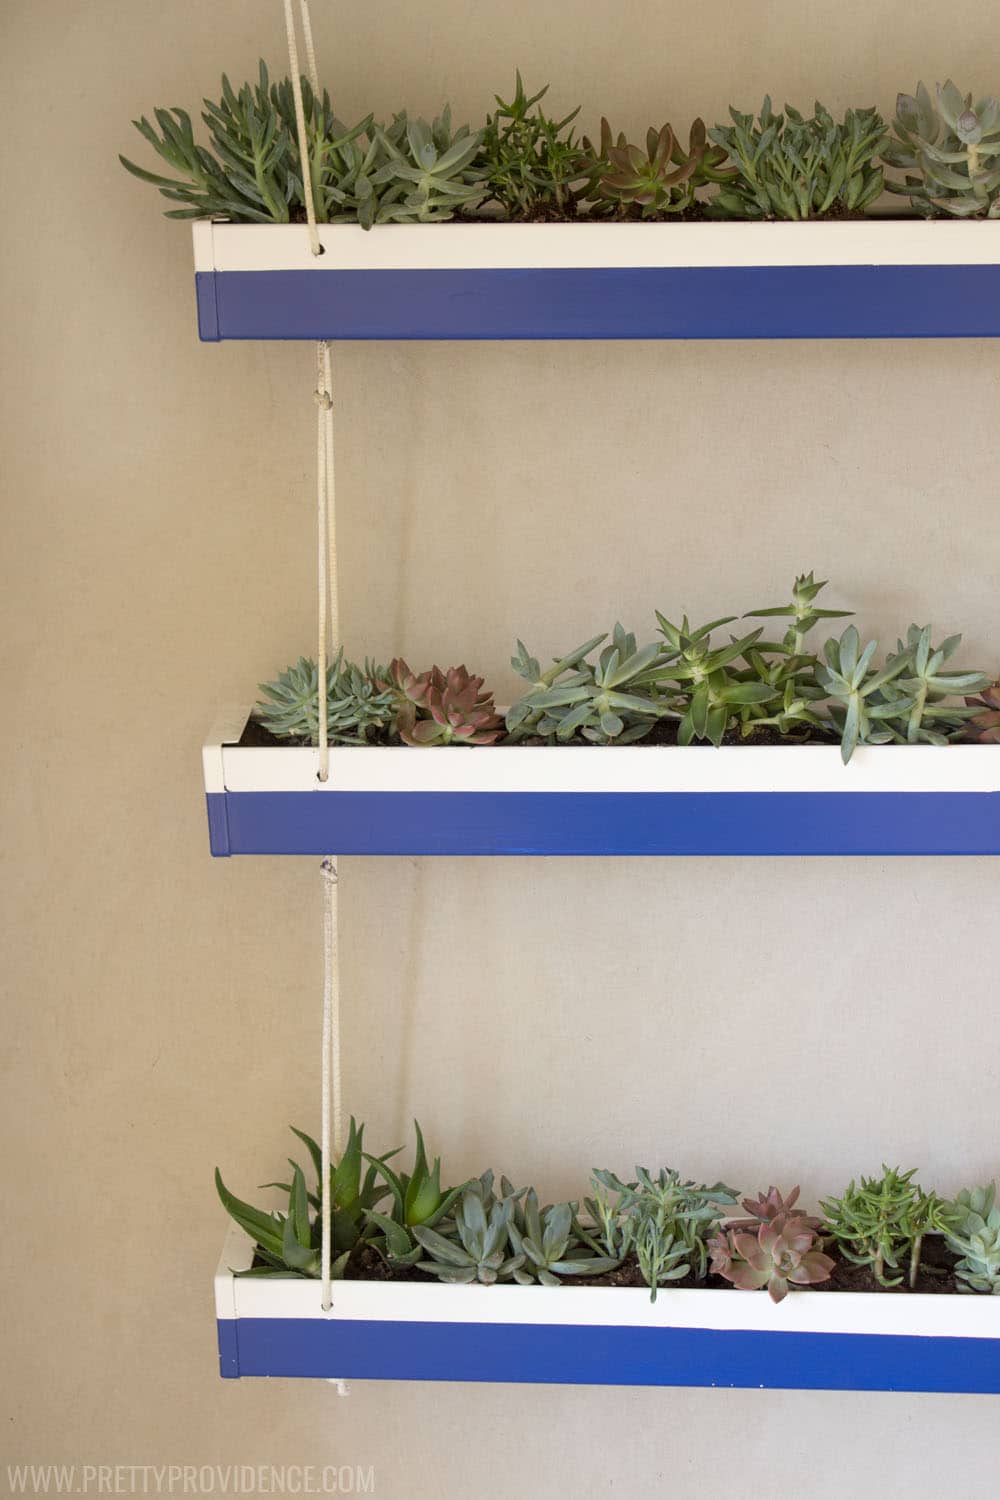 Okay seriously? How adorable is this DIY hanging gutter planter??! So cheap to make, too! Can't wait to try it out. 